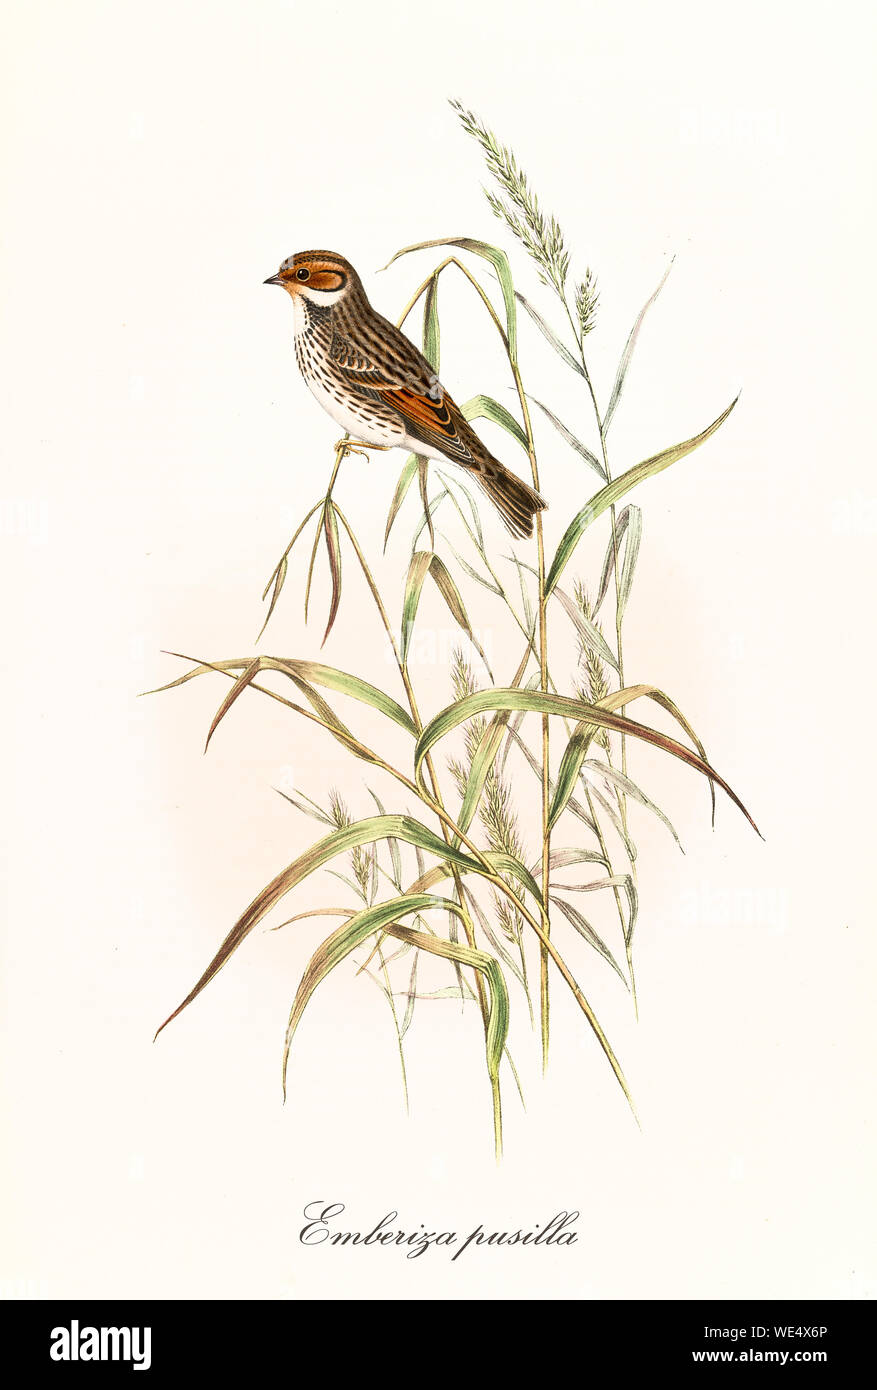 Isolated single little bird posing on a blade of grass over a white background. Detailed hand colored old style illustration of Little Bunting (Emberiza pusilla). By John Gould, London 1862 - 1873 Stock Photo